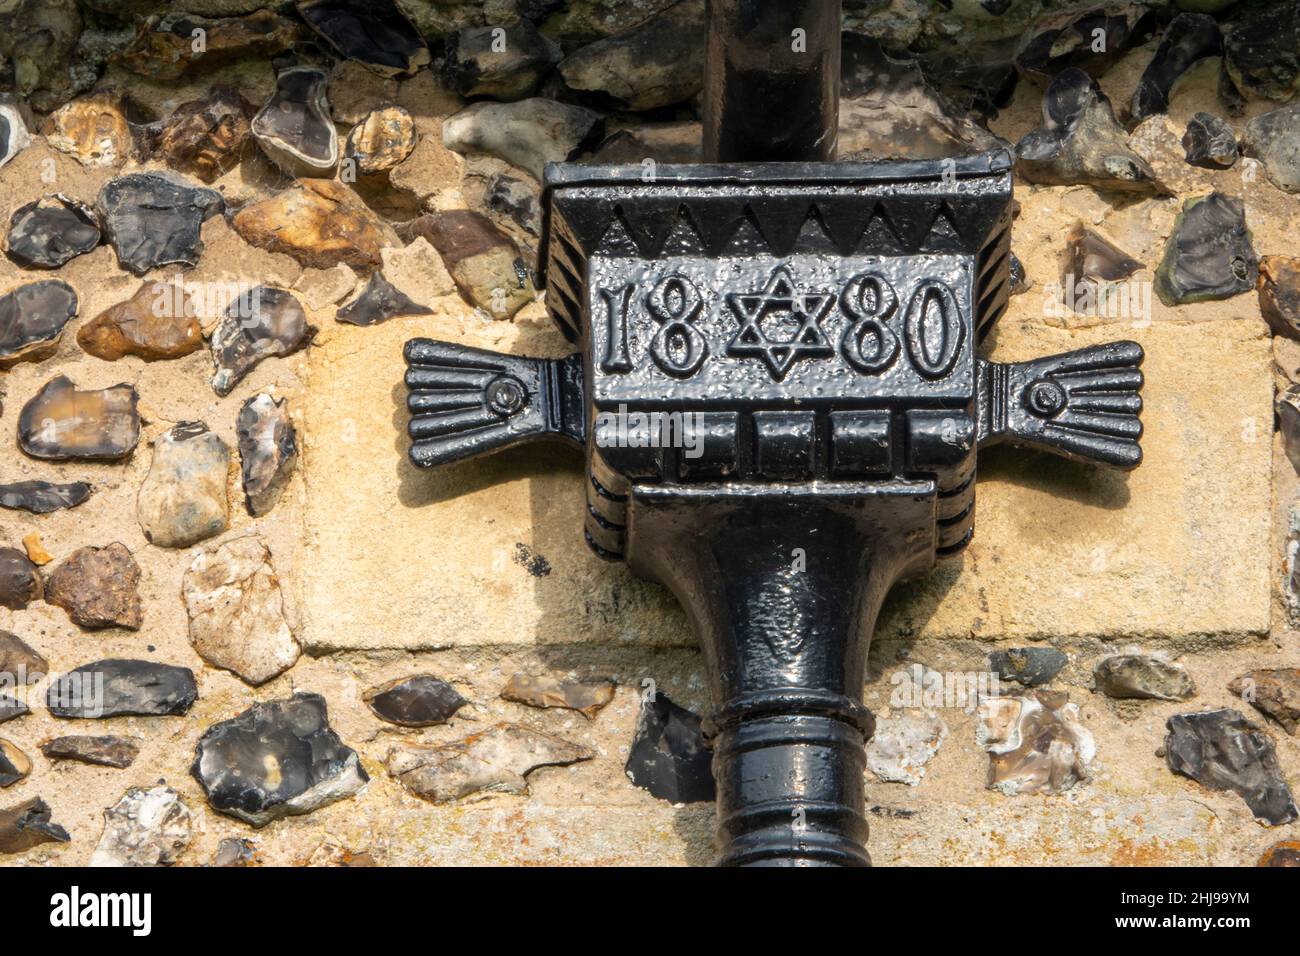 Cast iron drain pipe hopper dated 1880 with edge decorations and central hexagram motif Stock Photo